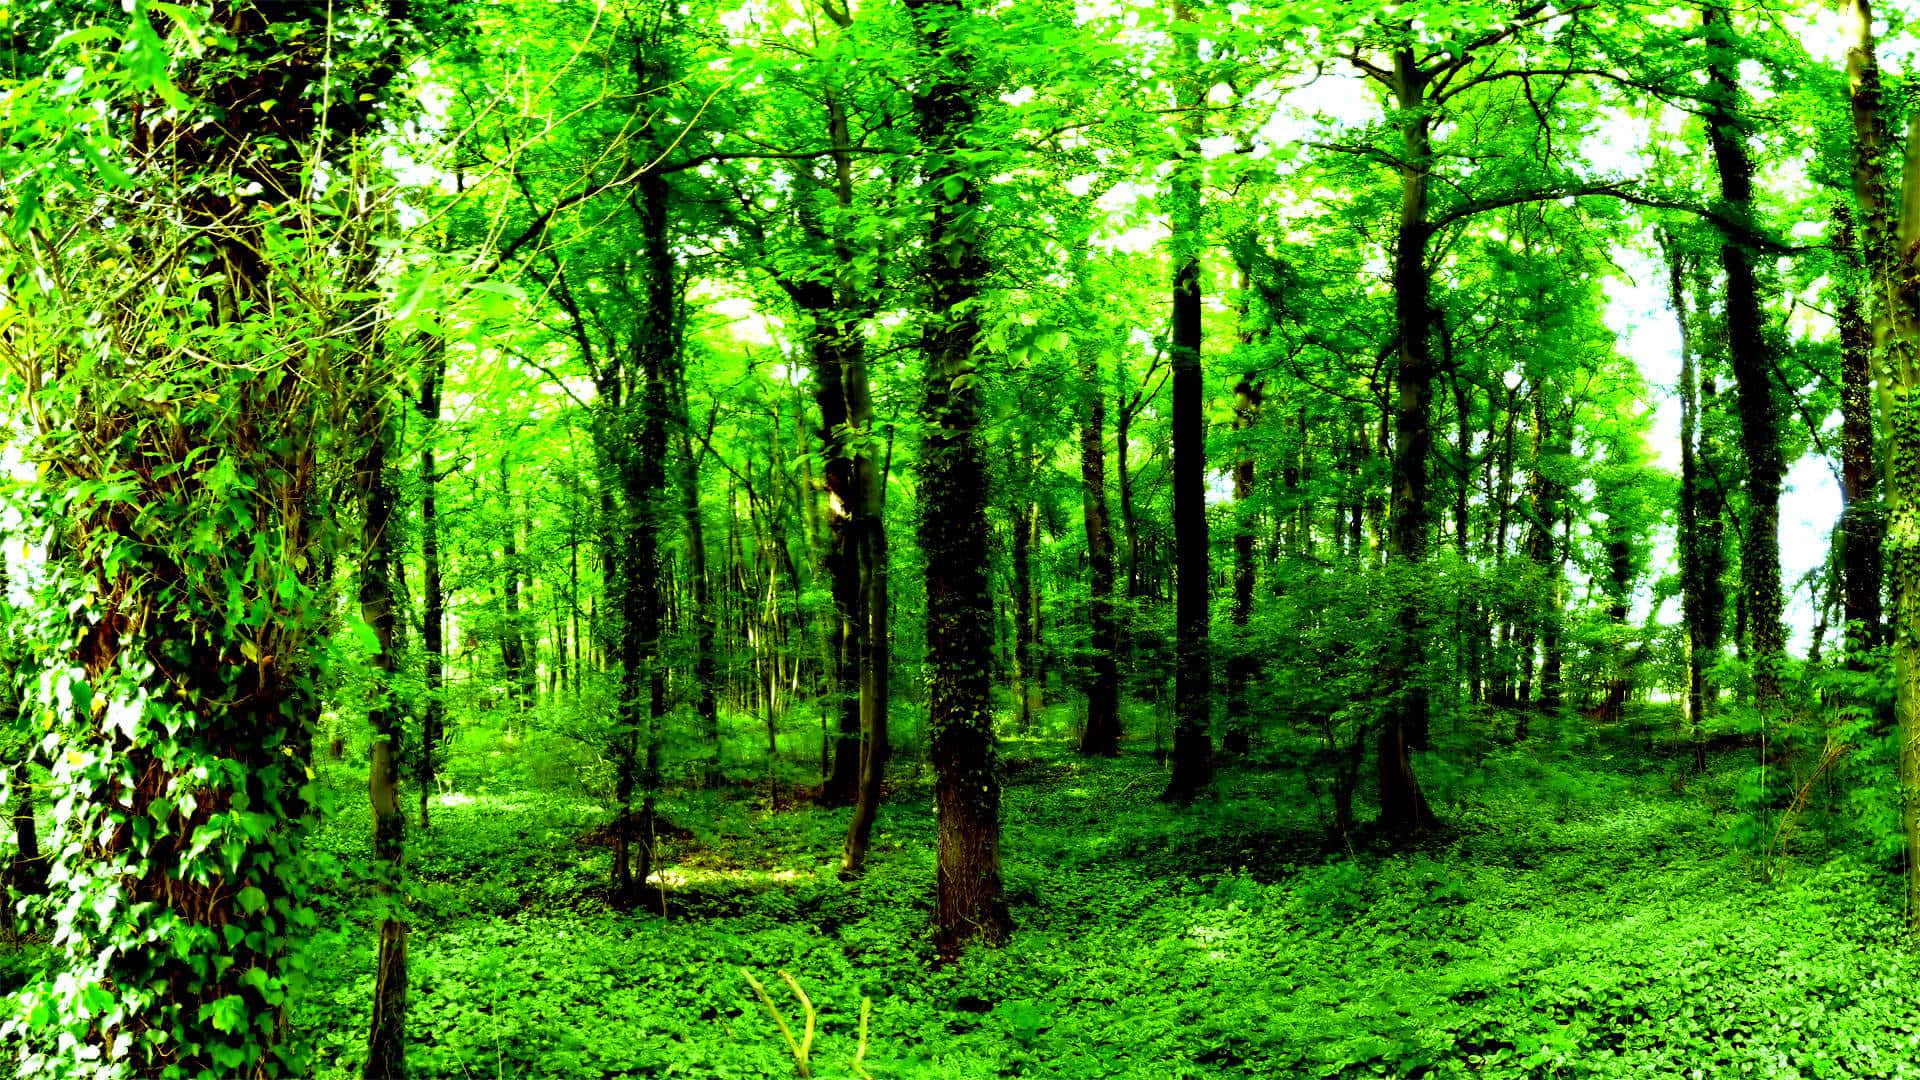 Nature At Its Finest: A Peaceful And Vibrant Forest Green Landscape